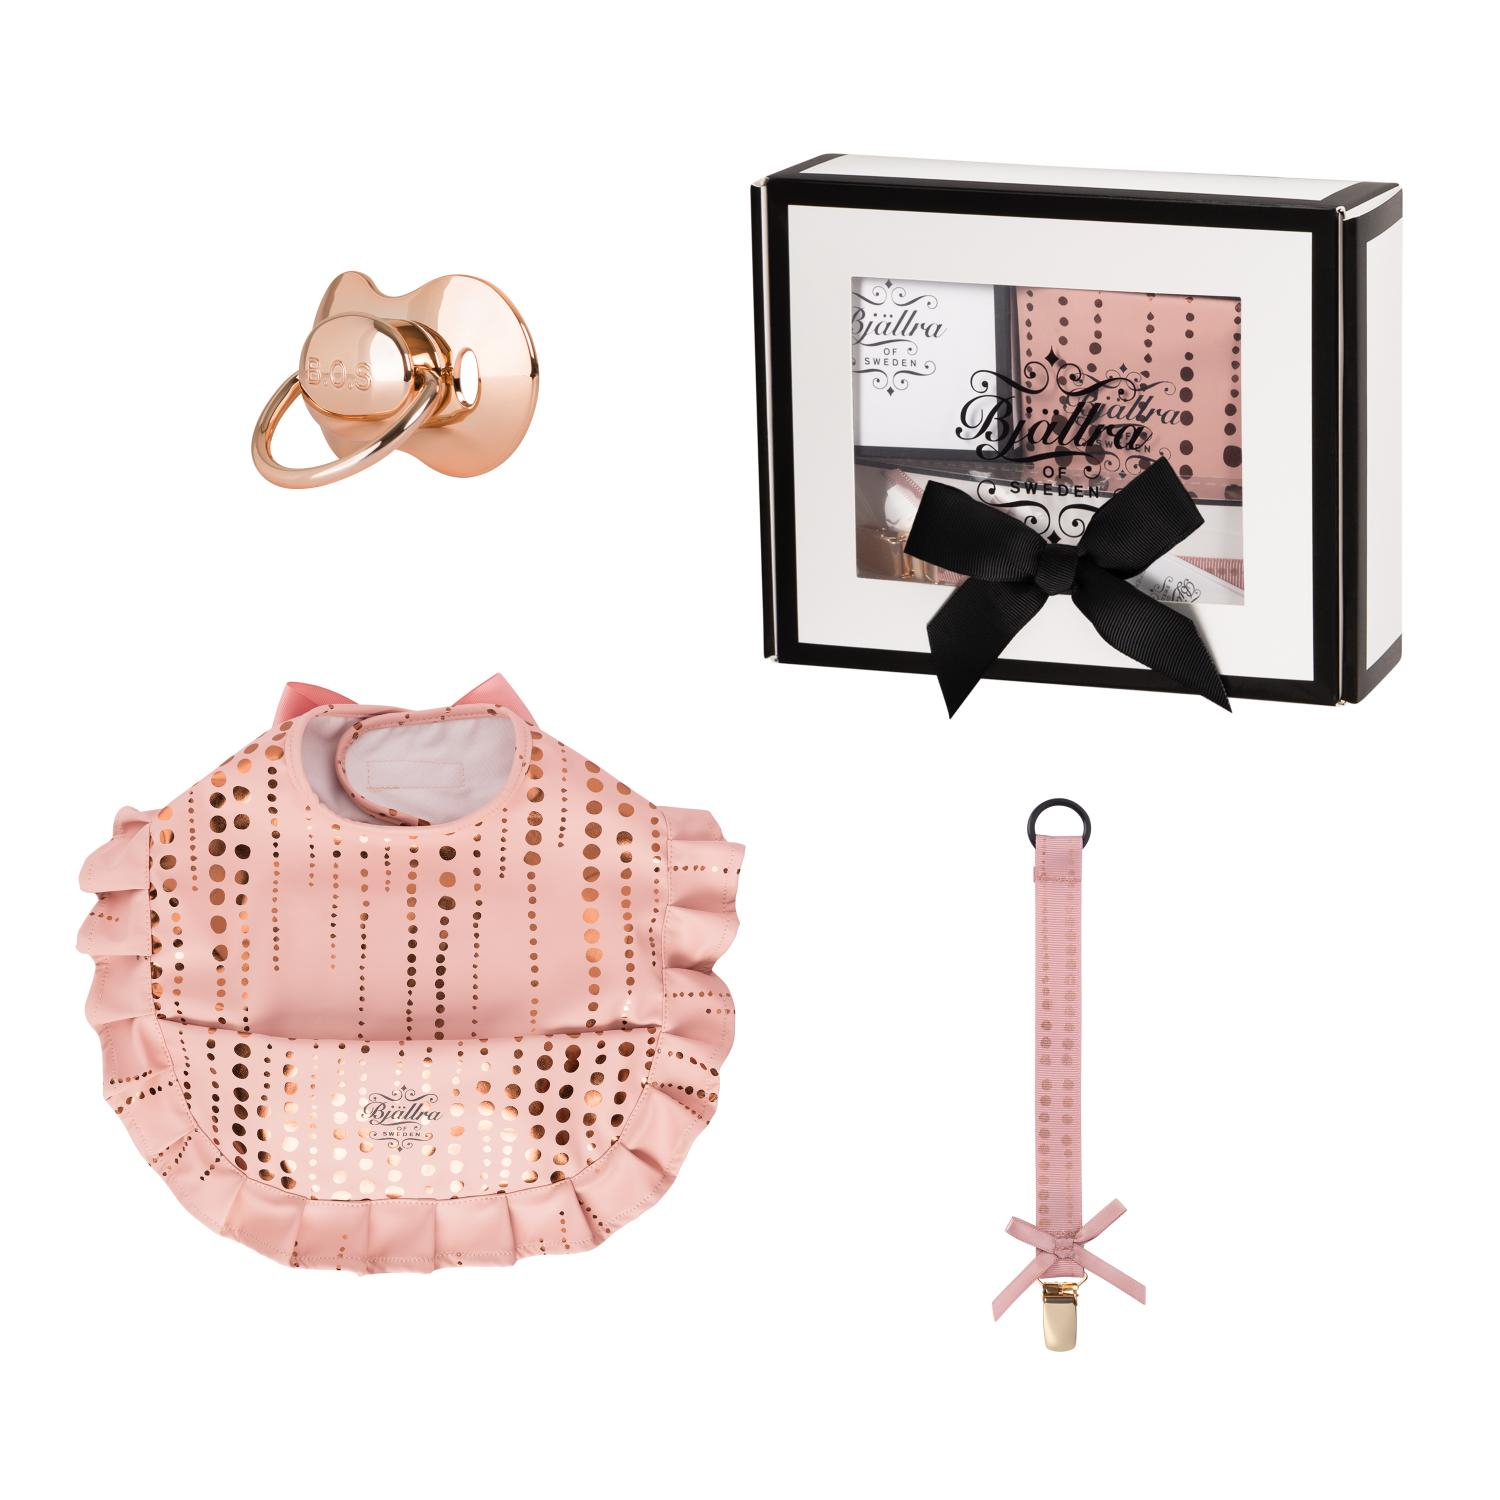 Giftbox Rose gold collectie